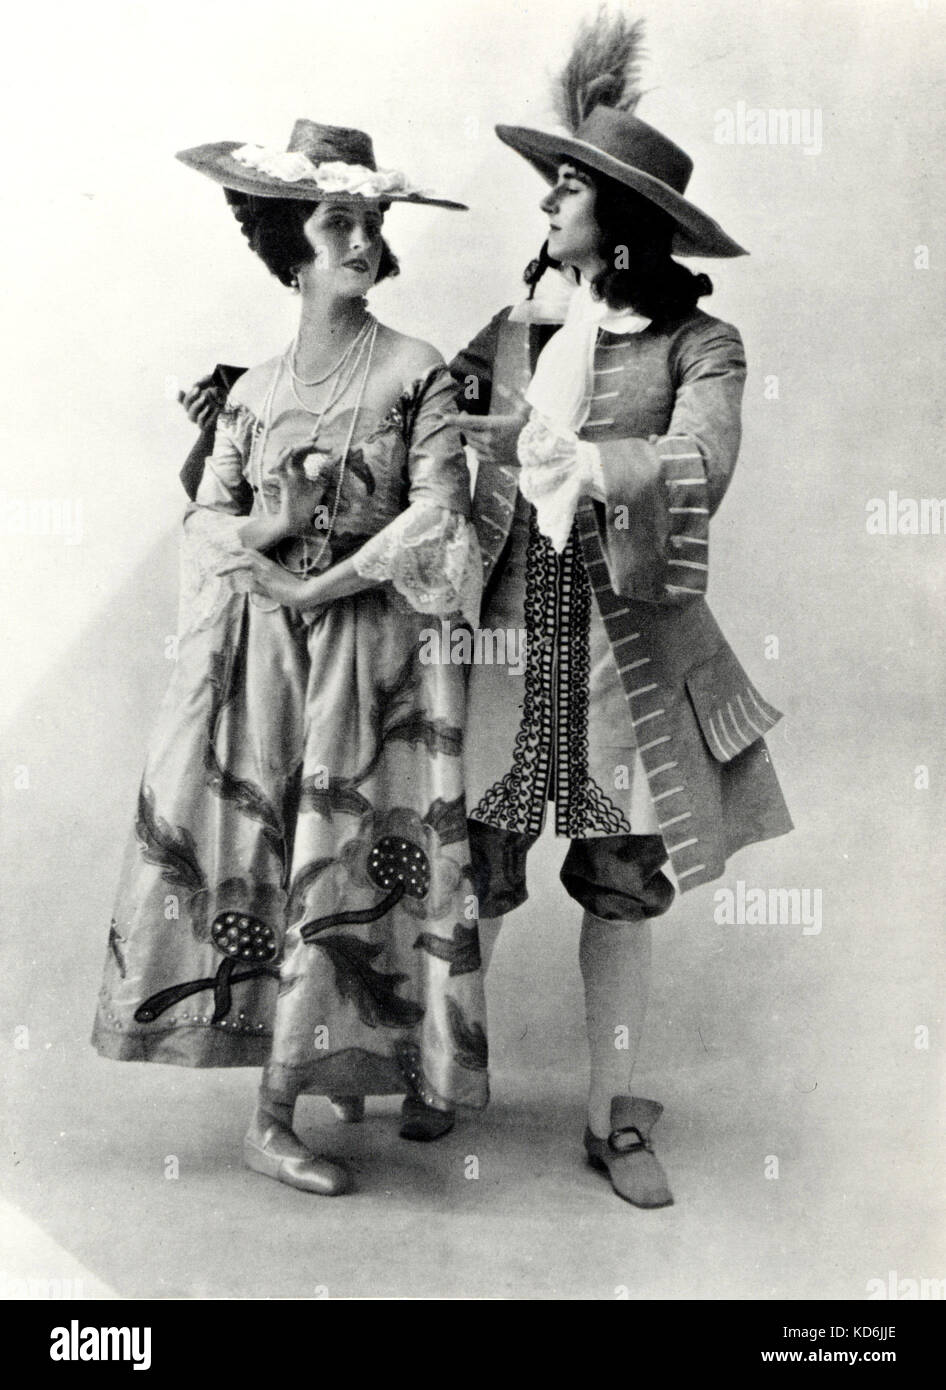 Georges Auric's ballet 'Les Fâcheux'  with Lubov Tchernicheva and Anton Dolin in the original 1924 production, Monte Carlo. Based on a comédie-ballet by Molière. Ballets Russes de Diaghilev. Choreography by Nijinska. . Ballet Russe, Ballets Russes Stock Photo